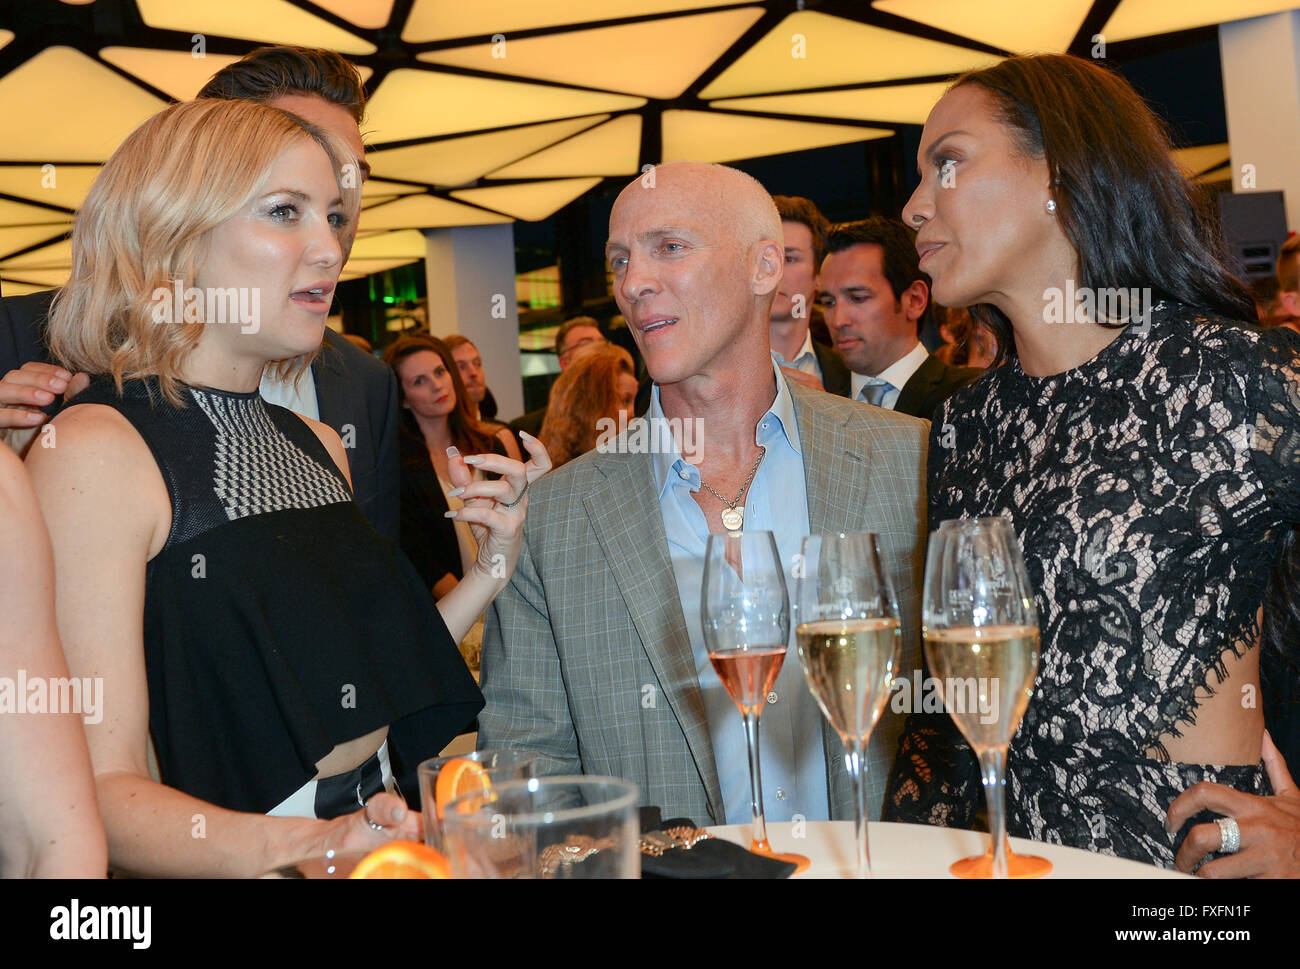 Berlin, Germany. 14th Apr, 2016. US actress Kate Hudson (L-R), US fitness coach David Kirsch and German fitness coach Barbara Becker attend the opening party of the fitness studio 'World of Cyberobics' in Berlin, Germany, 14 April 2016. The fitness arena will open on 18 April 2016. Photo: Britta Pedersen/dpa/Alamy Live News Stock Photo